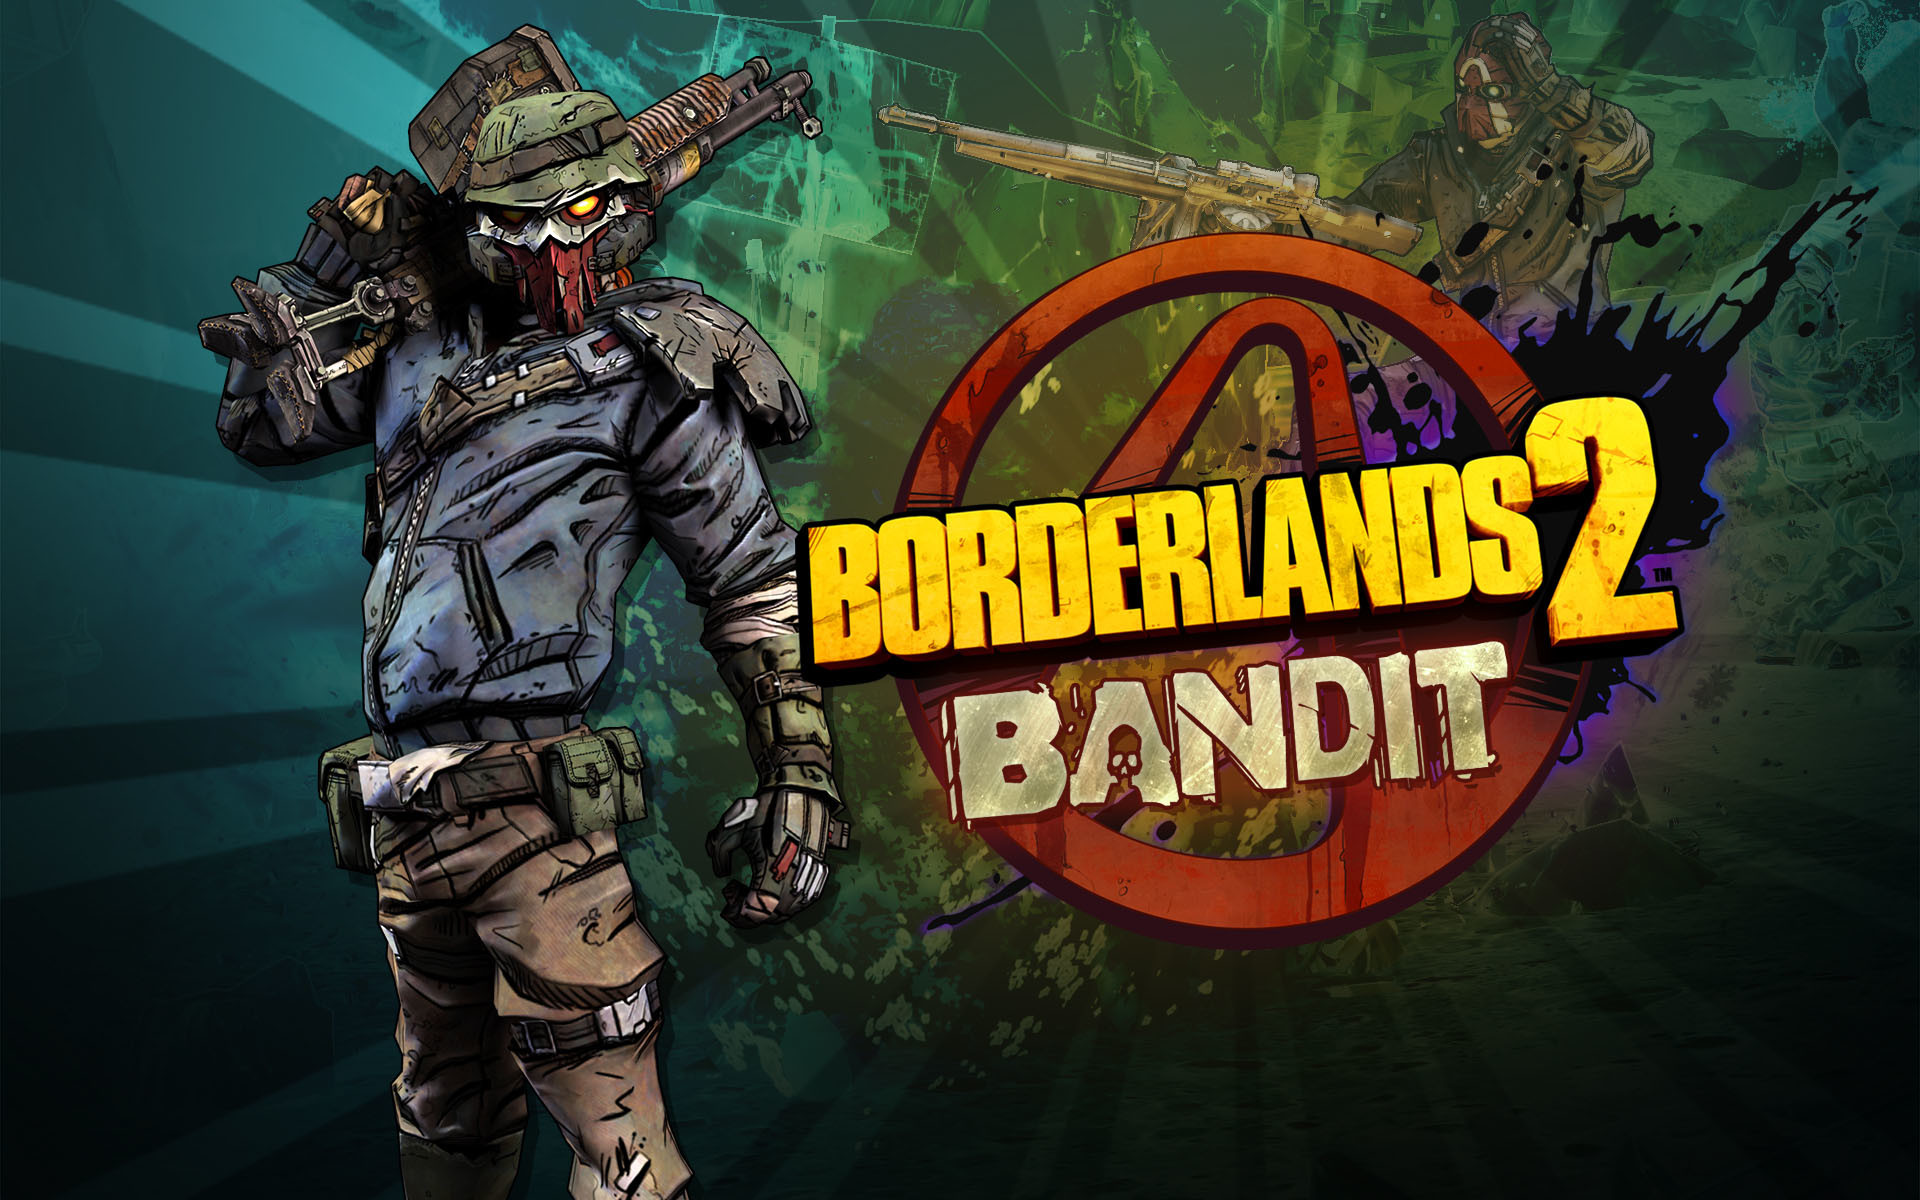 1920x1200 241 Borderlands 2 HD Wallpapers | Backgrounds - Wallpaper Abyss Borderlands  2 Desktop Wallpapers - Wallpaper Cave ...